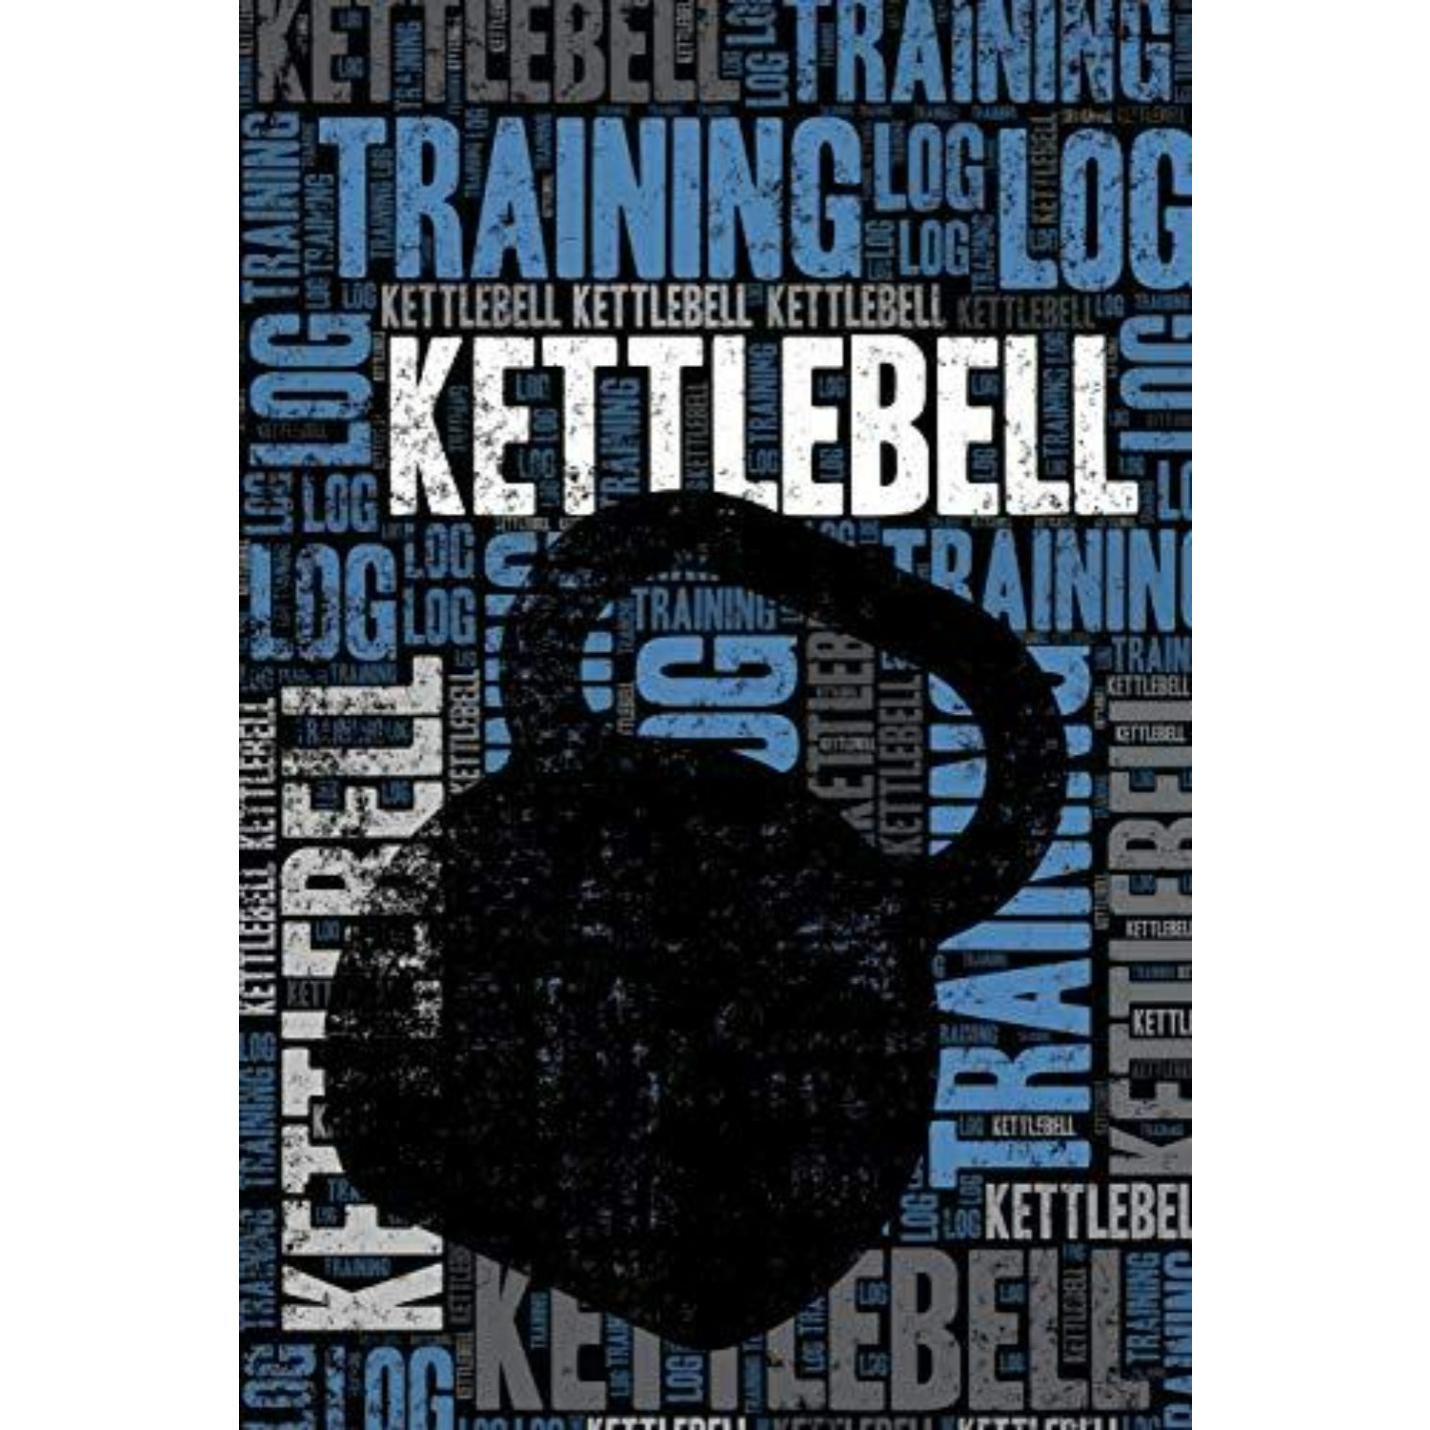 Kettlebell Training Log and Diary: Kettlebell Training Journal and Book for Practitioner and Instructor - Kettlebell Notebook Tracker - happygetfit.com